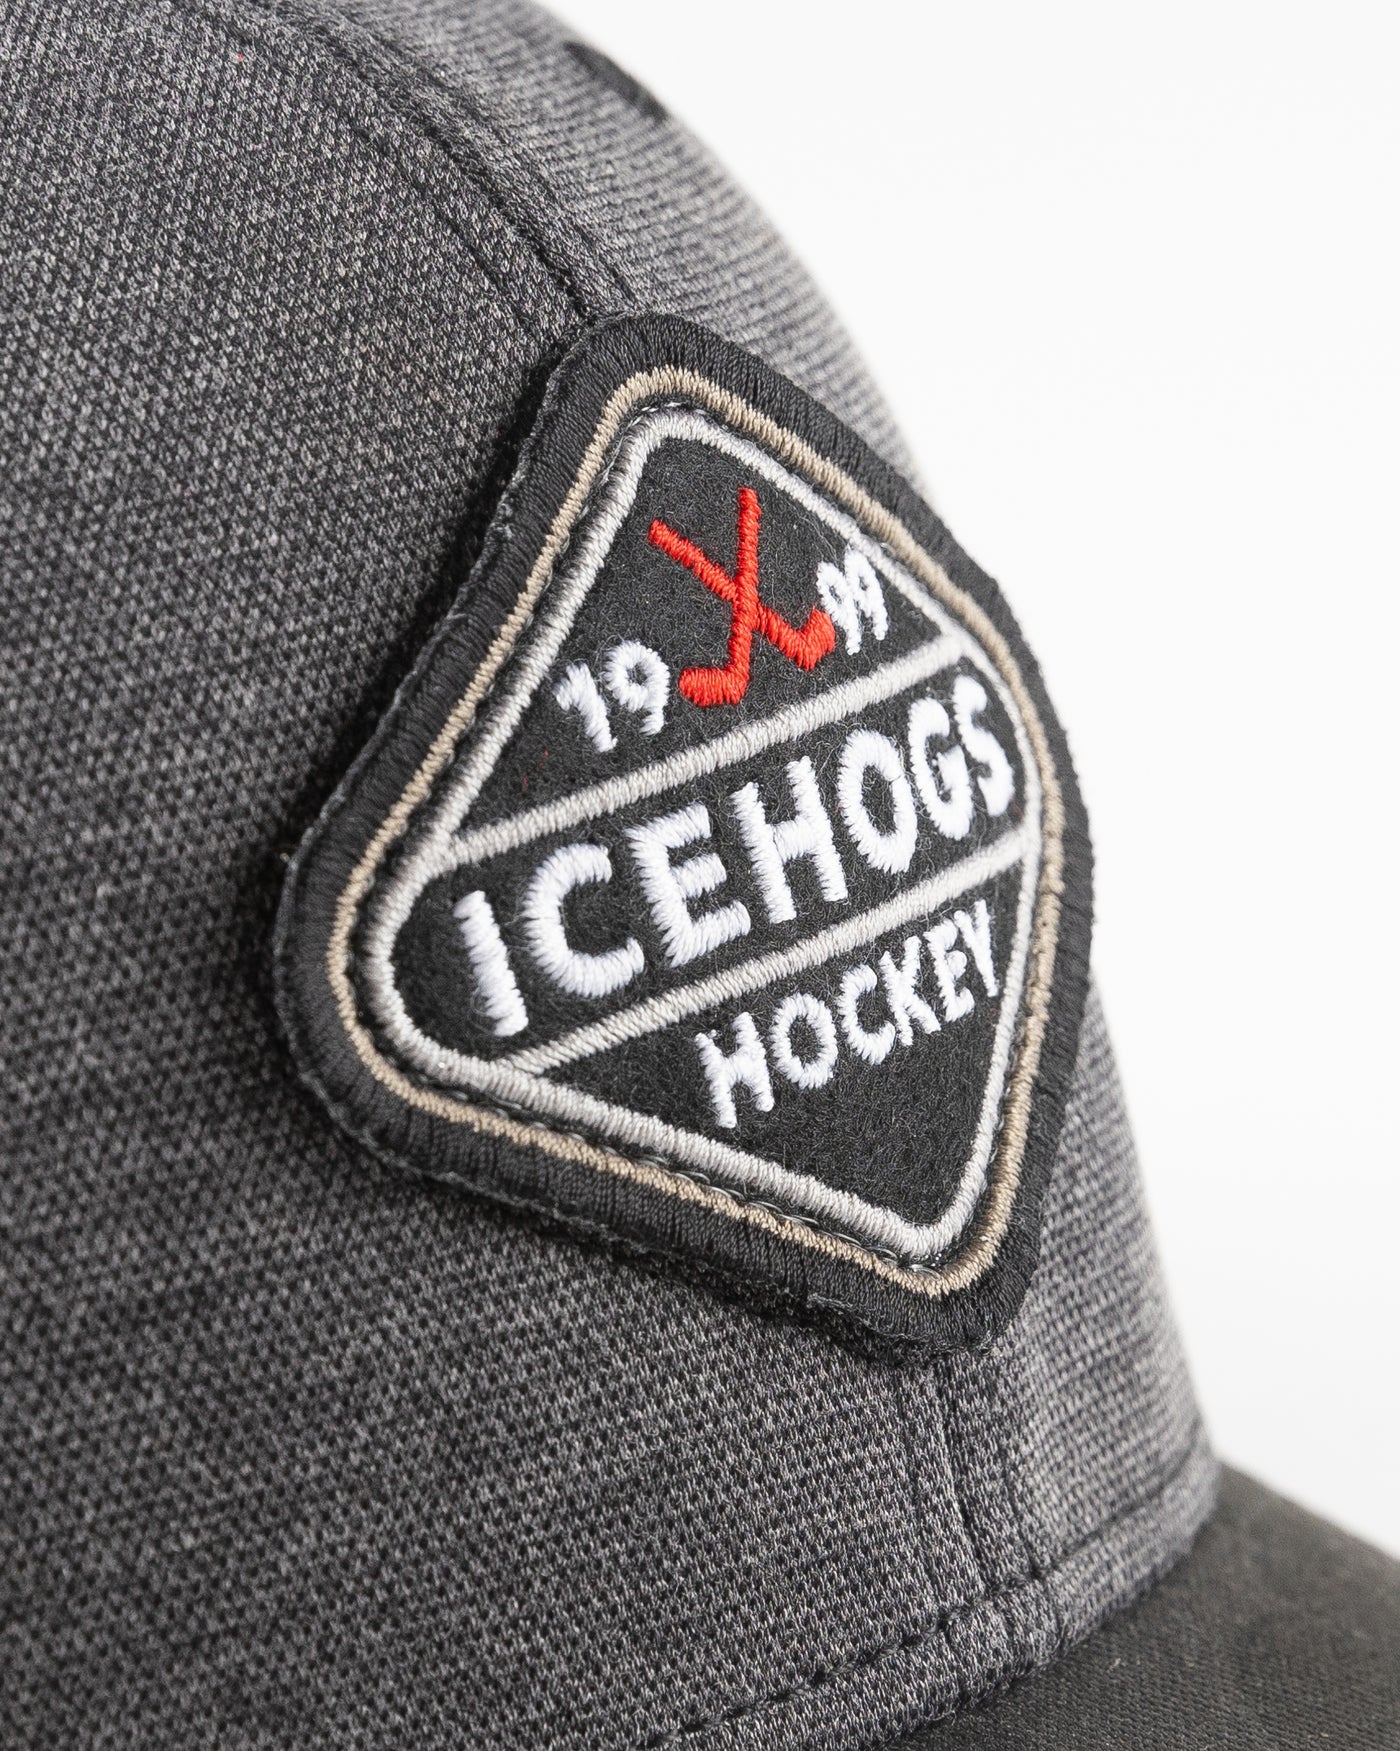 black Rockford IceHogs trucker with camo brim and embroidered patch - detail lay flat